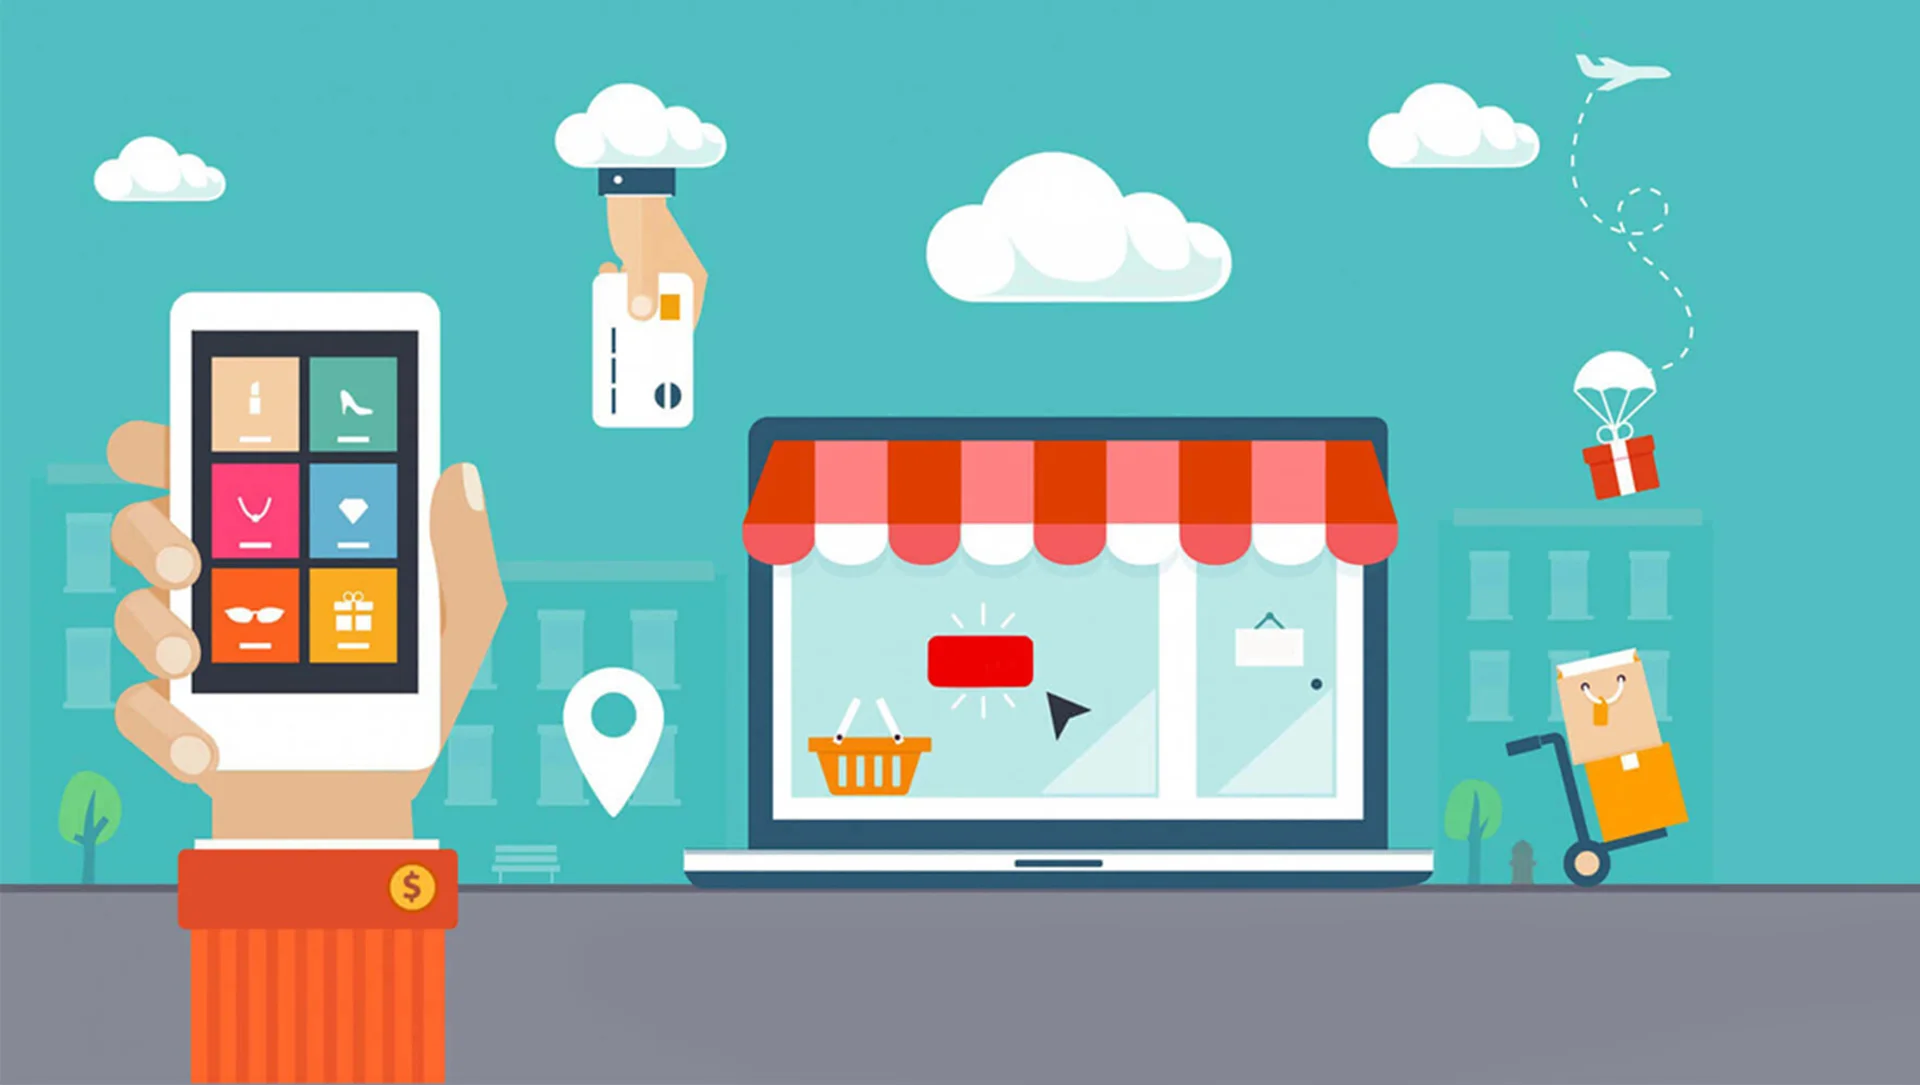 E-Commerce Mobile App Development 2022: Know the Features, Trends, Cost